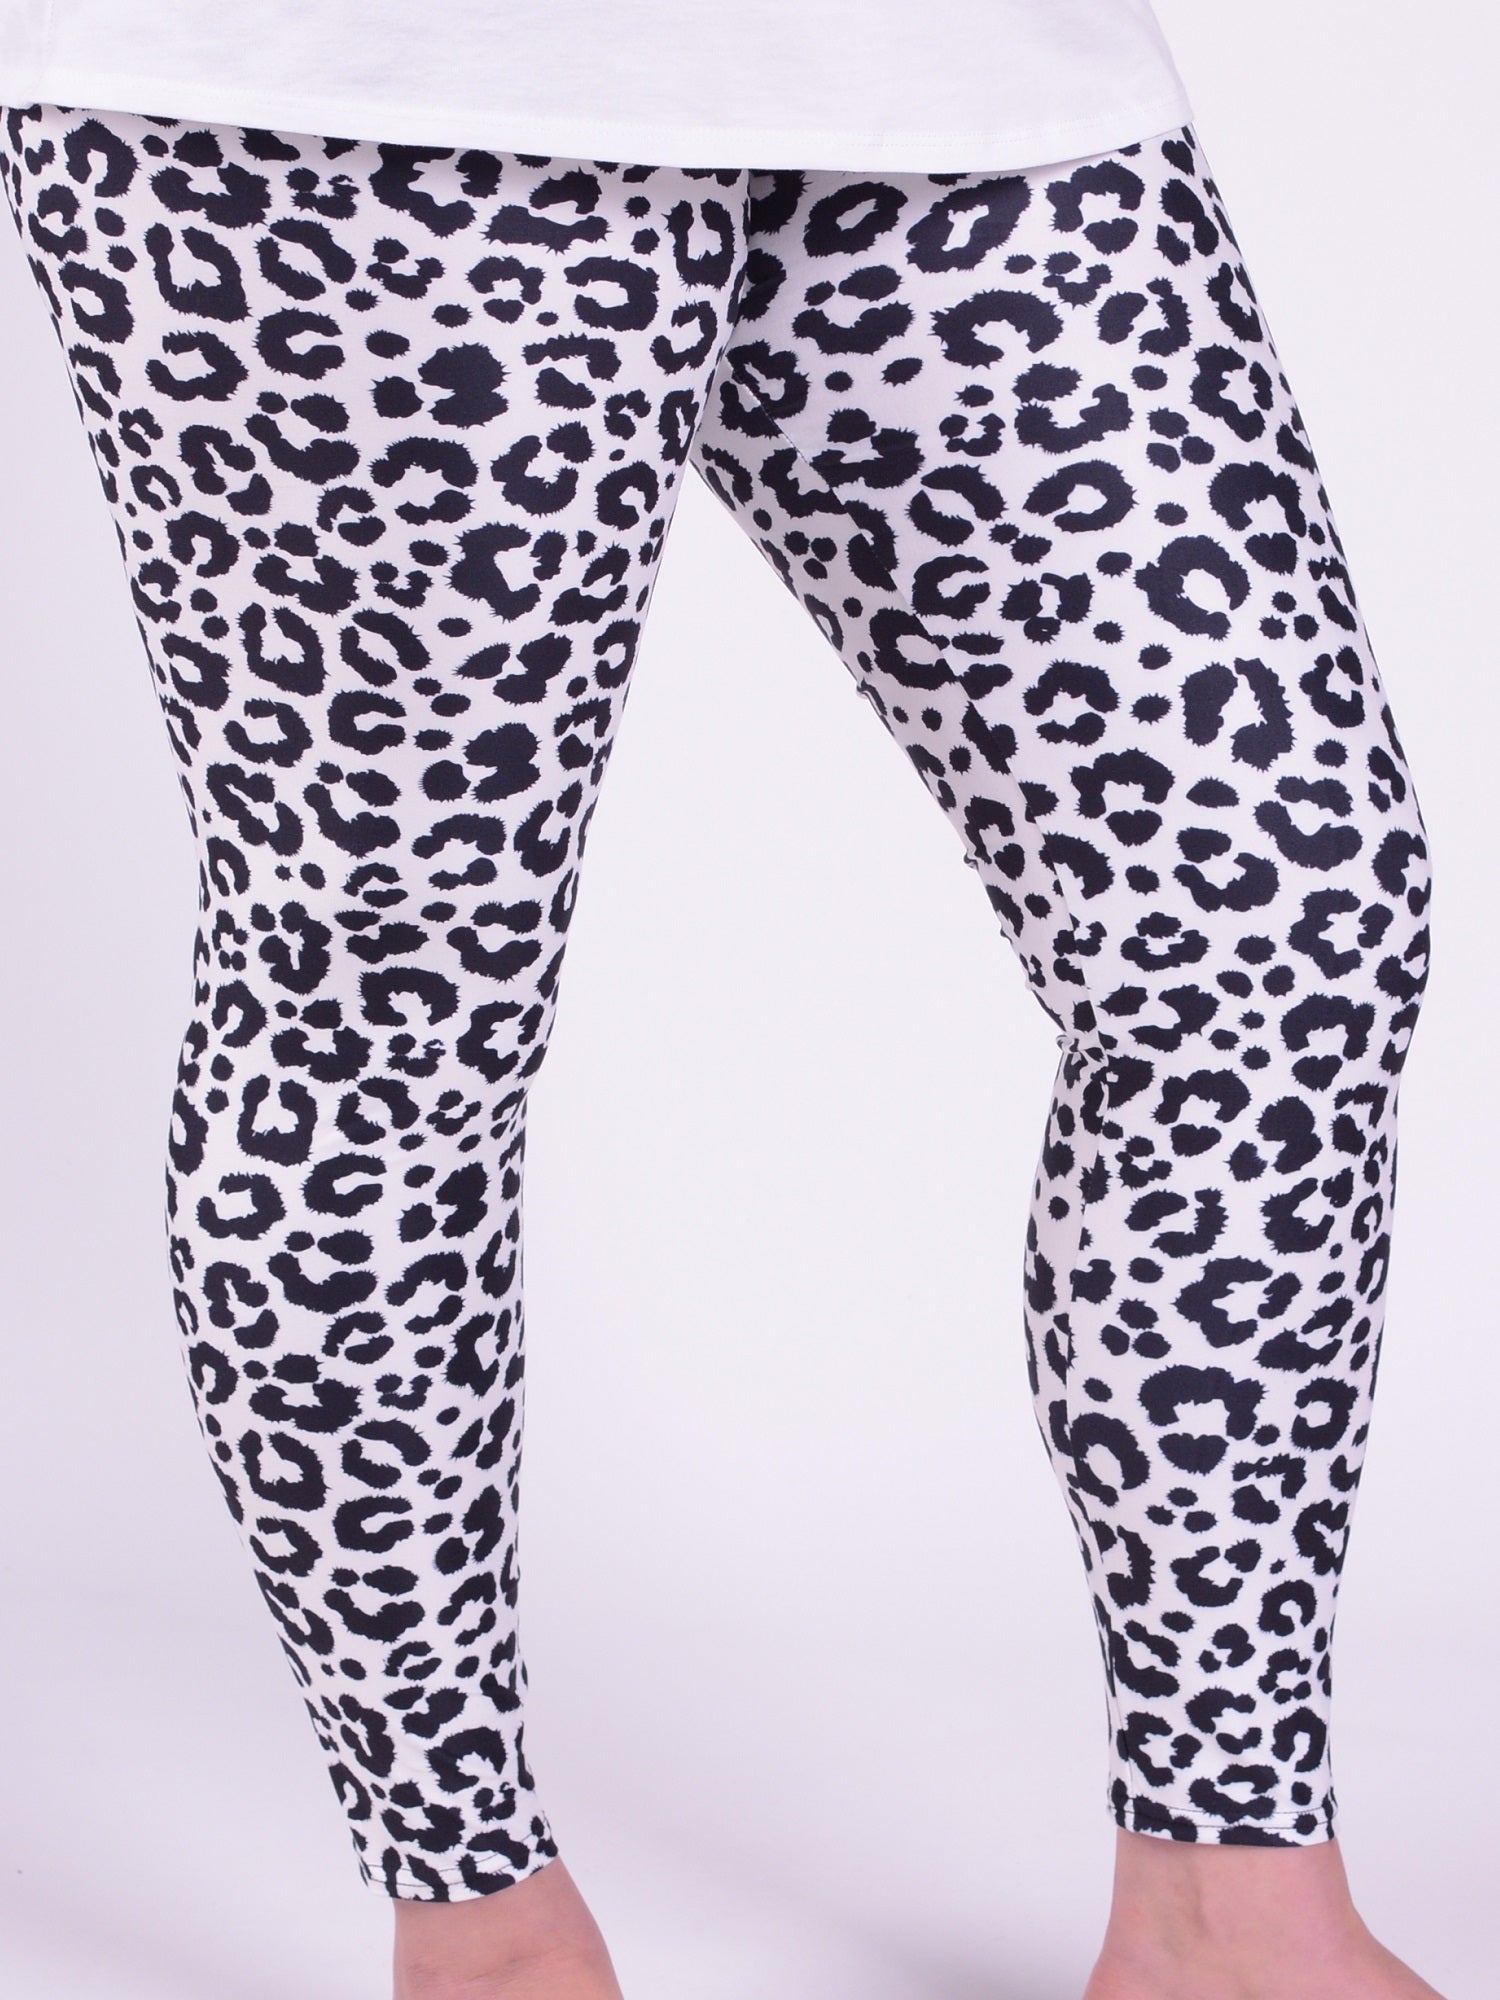 Leggings  - Black and White Leopard - L59, Trousers, Pure Plus Clothing, Lagenlook Clothing, Plus Size Fashion, Over 50 Fashion